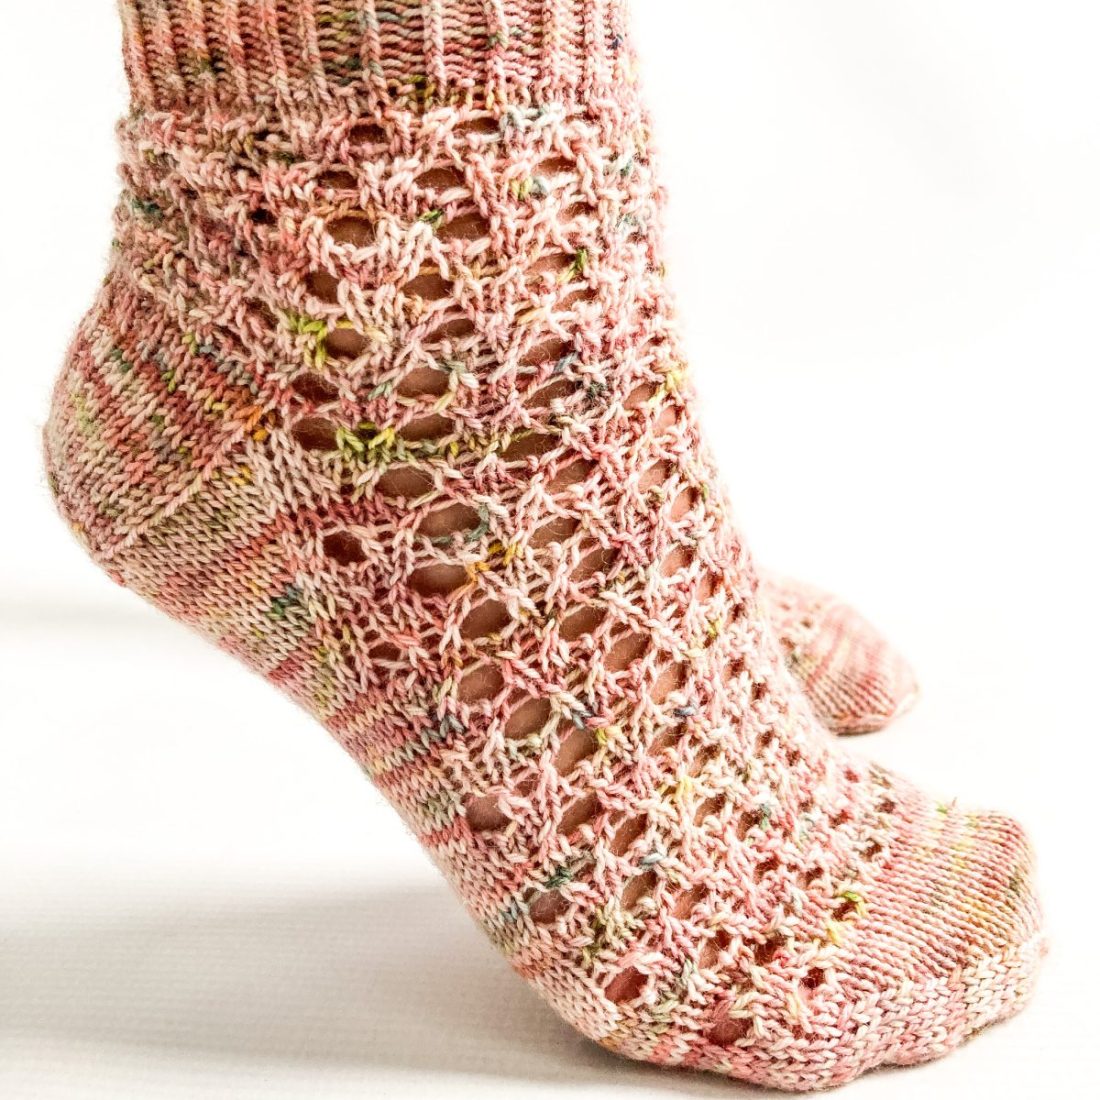 Foot on tiptoe wearing a a hand knit sock in a lace pattern and peachy pink variegated sock yarn